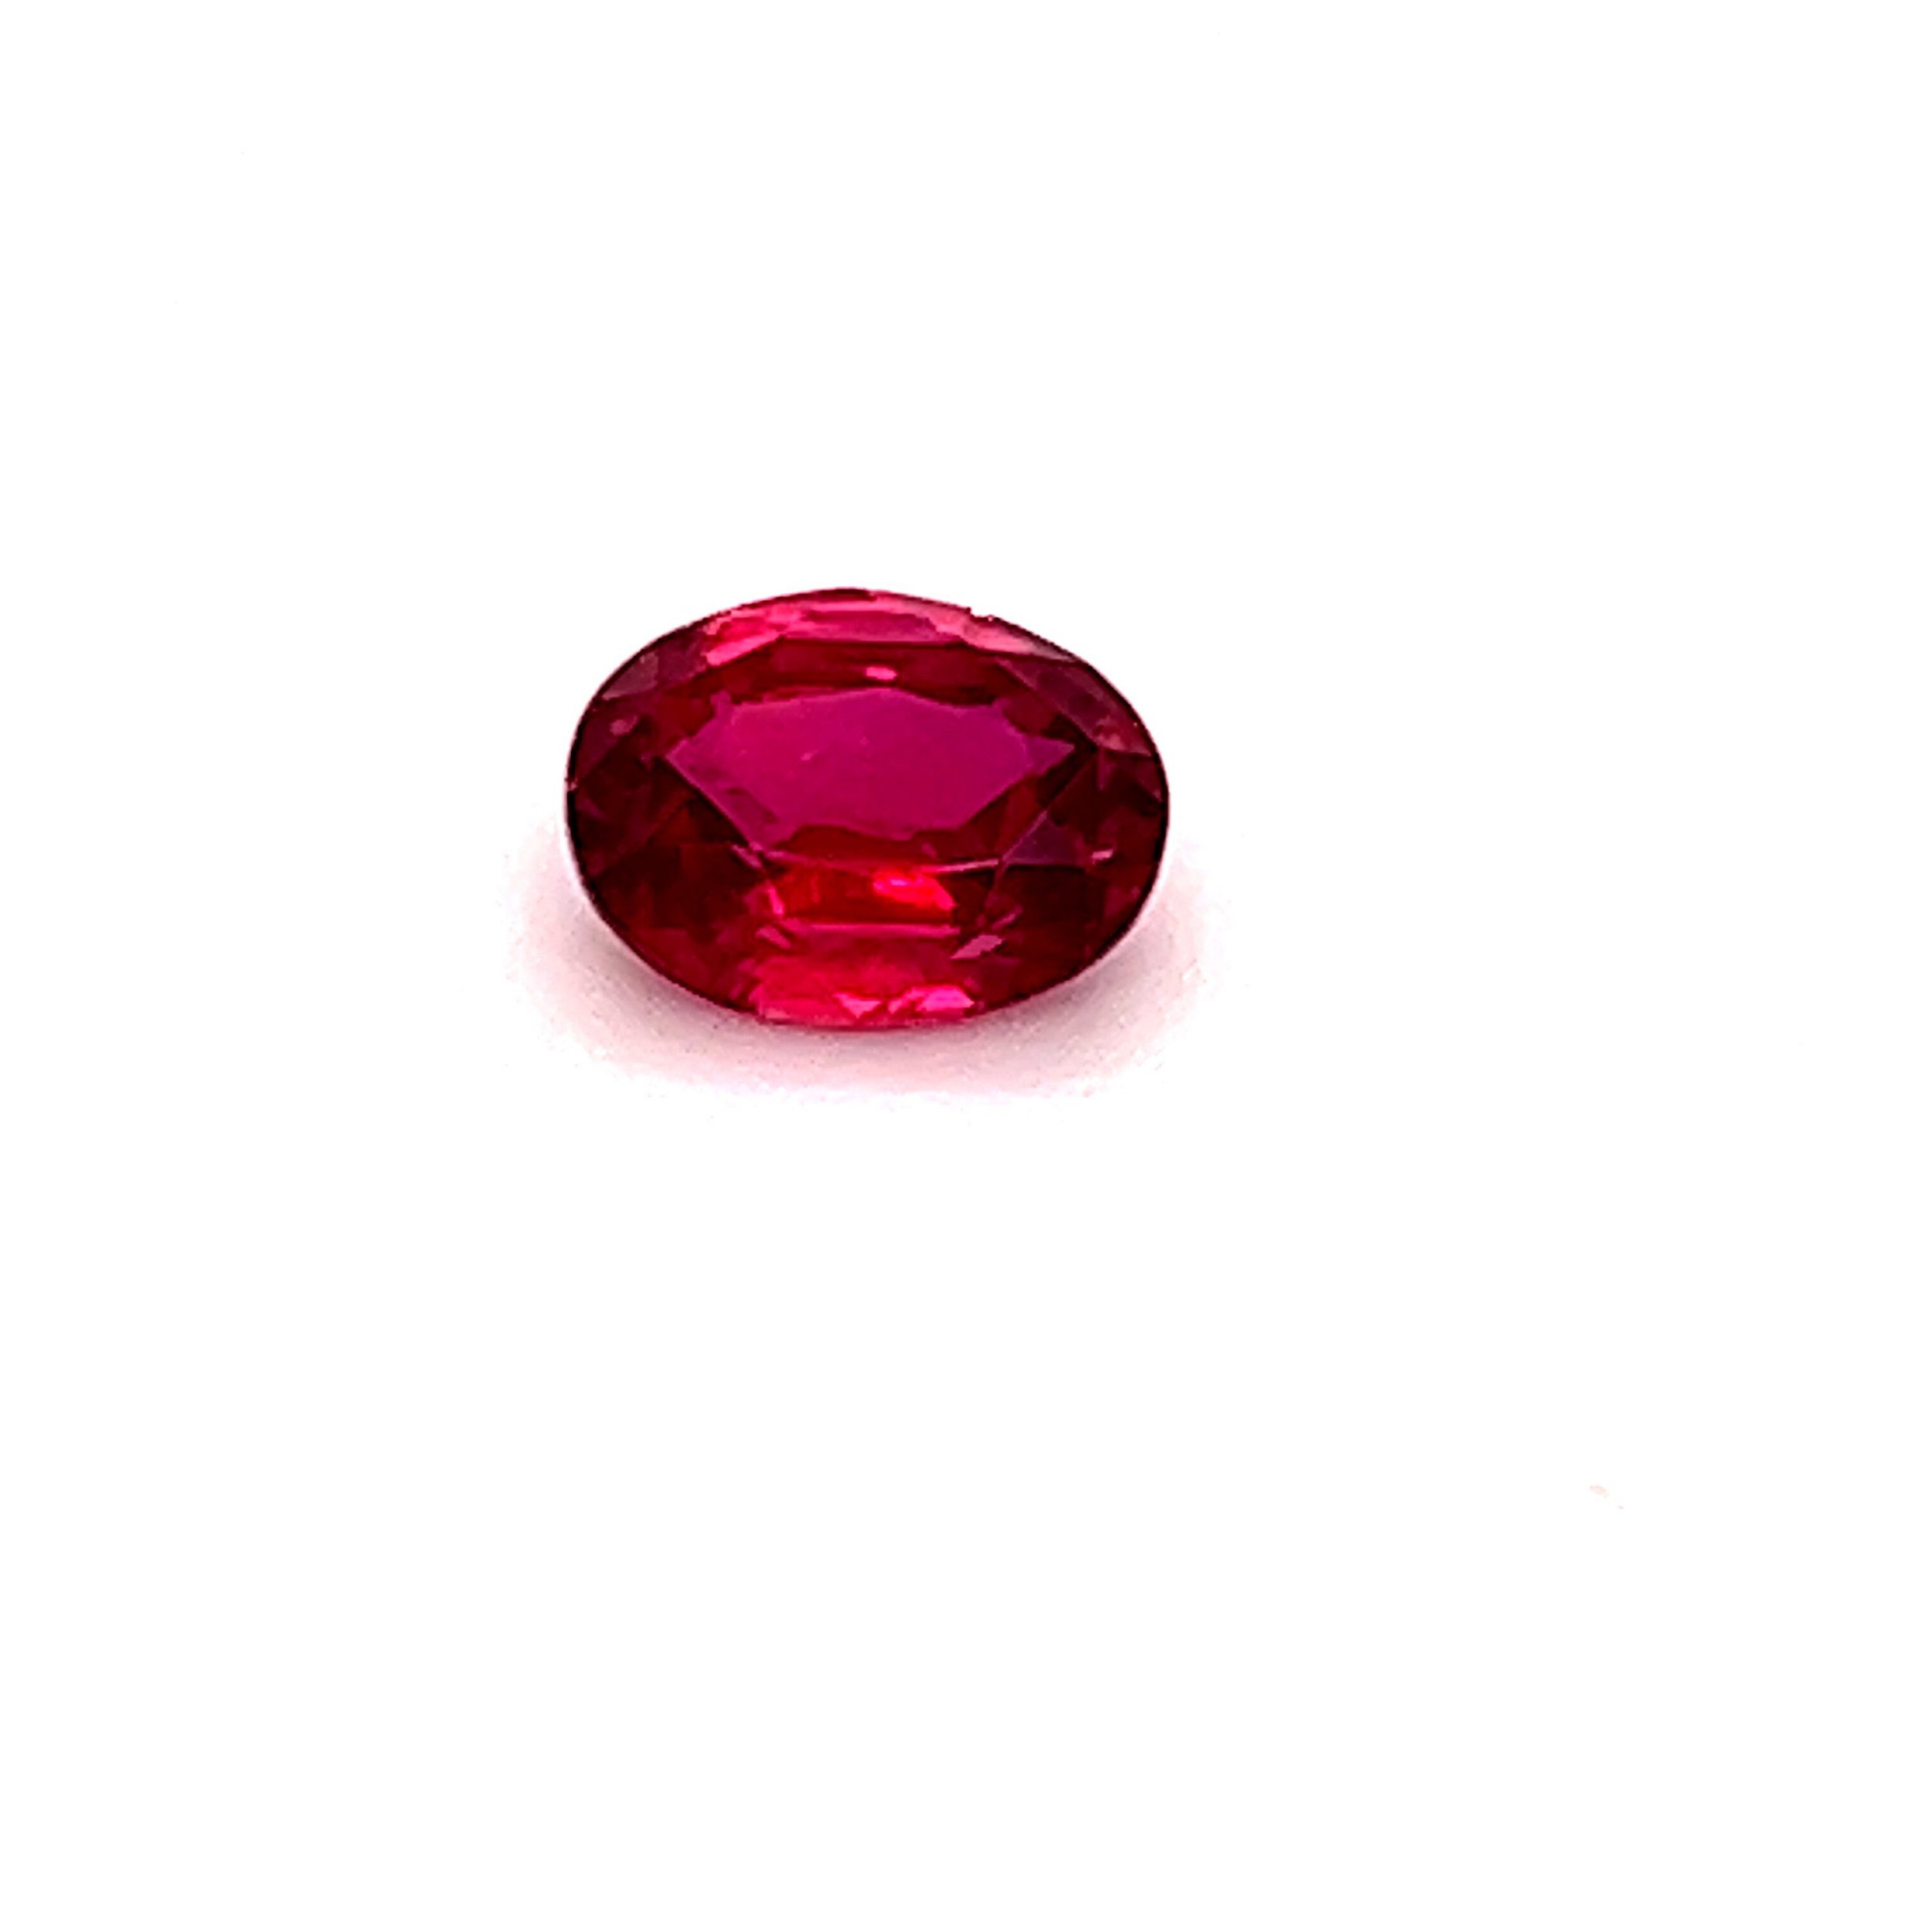 2.01ct Oval Cut Mozambique Natural Ruby -AGL